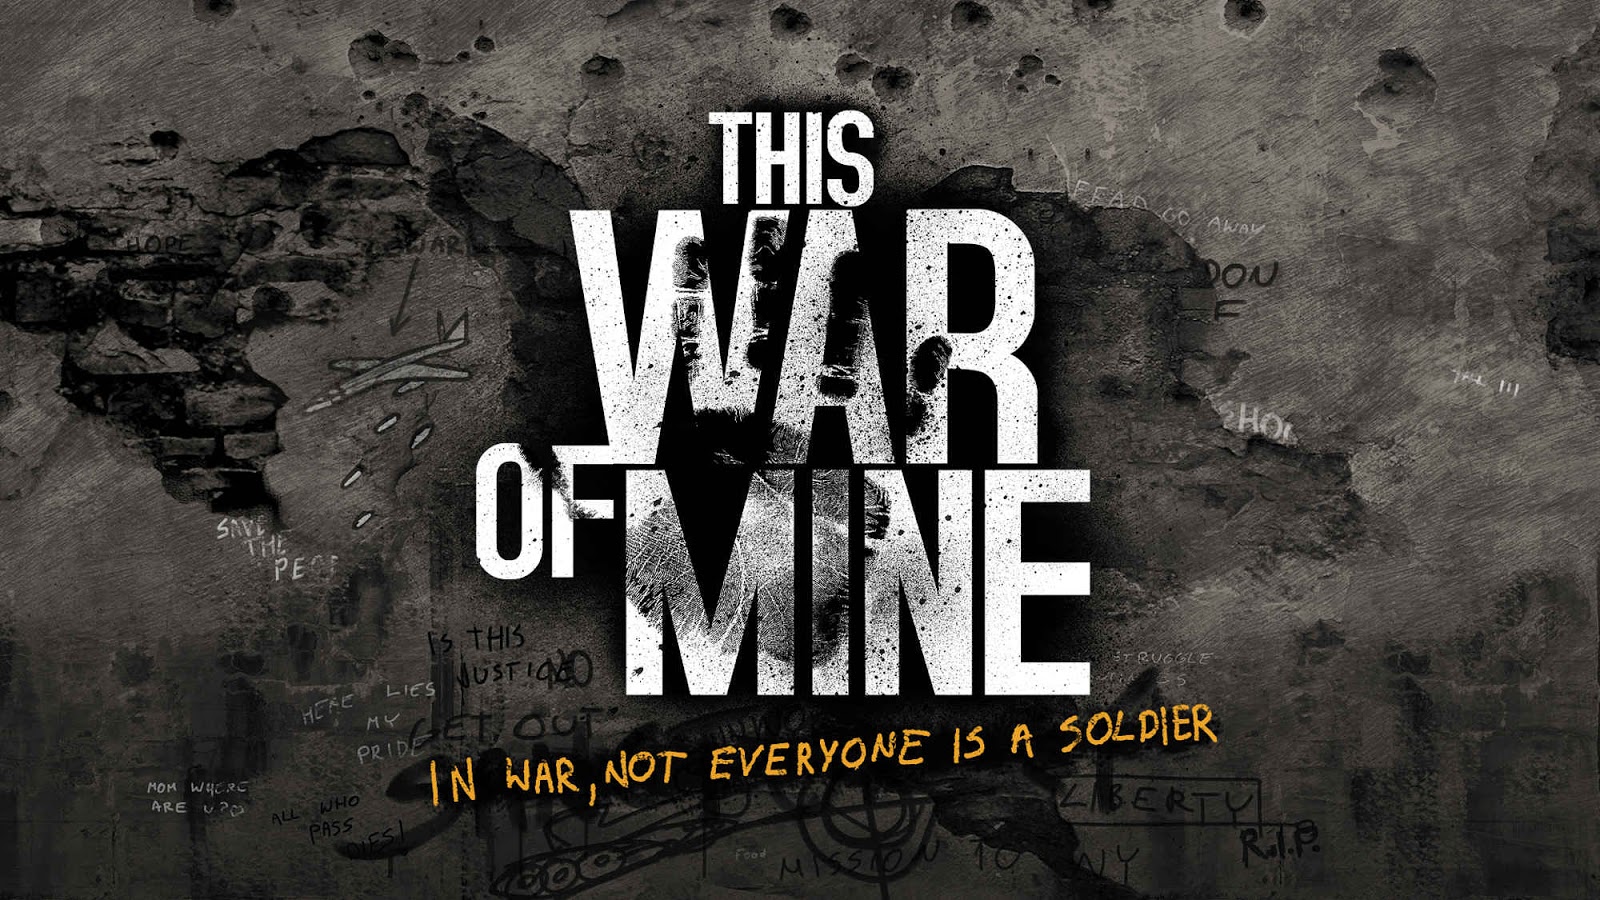 This War of Mine v1.4.3 Mod Apk Data Unlocked DLCs For Android